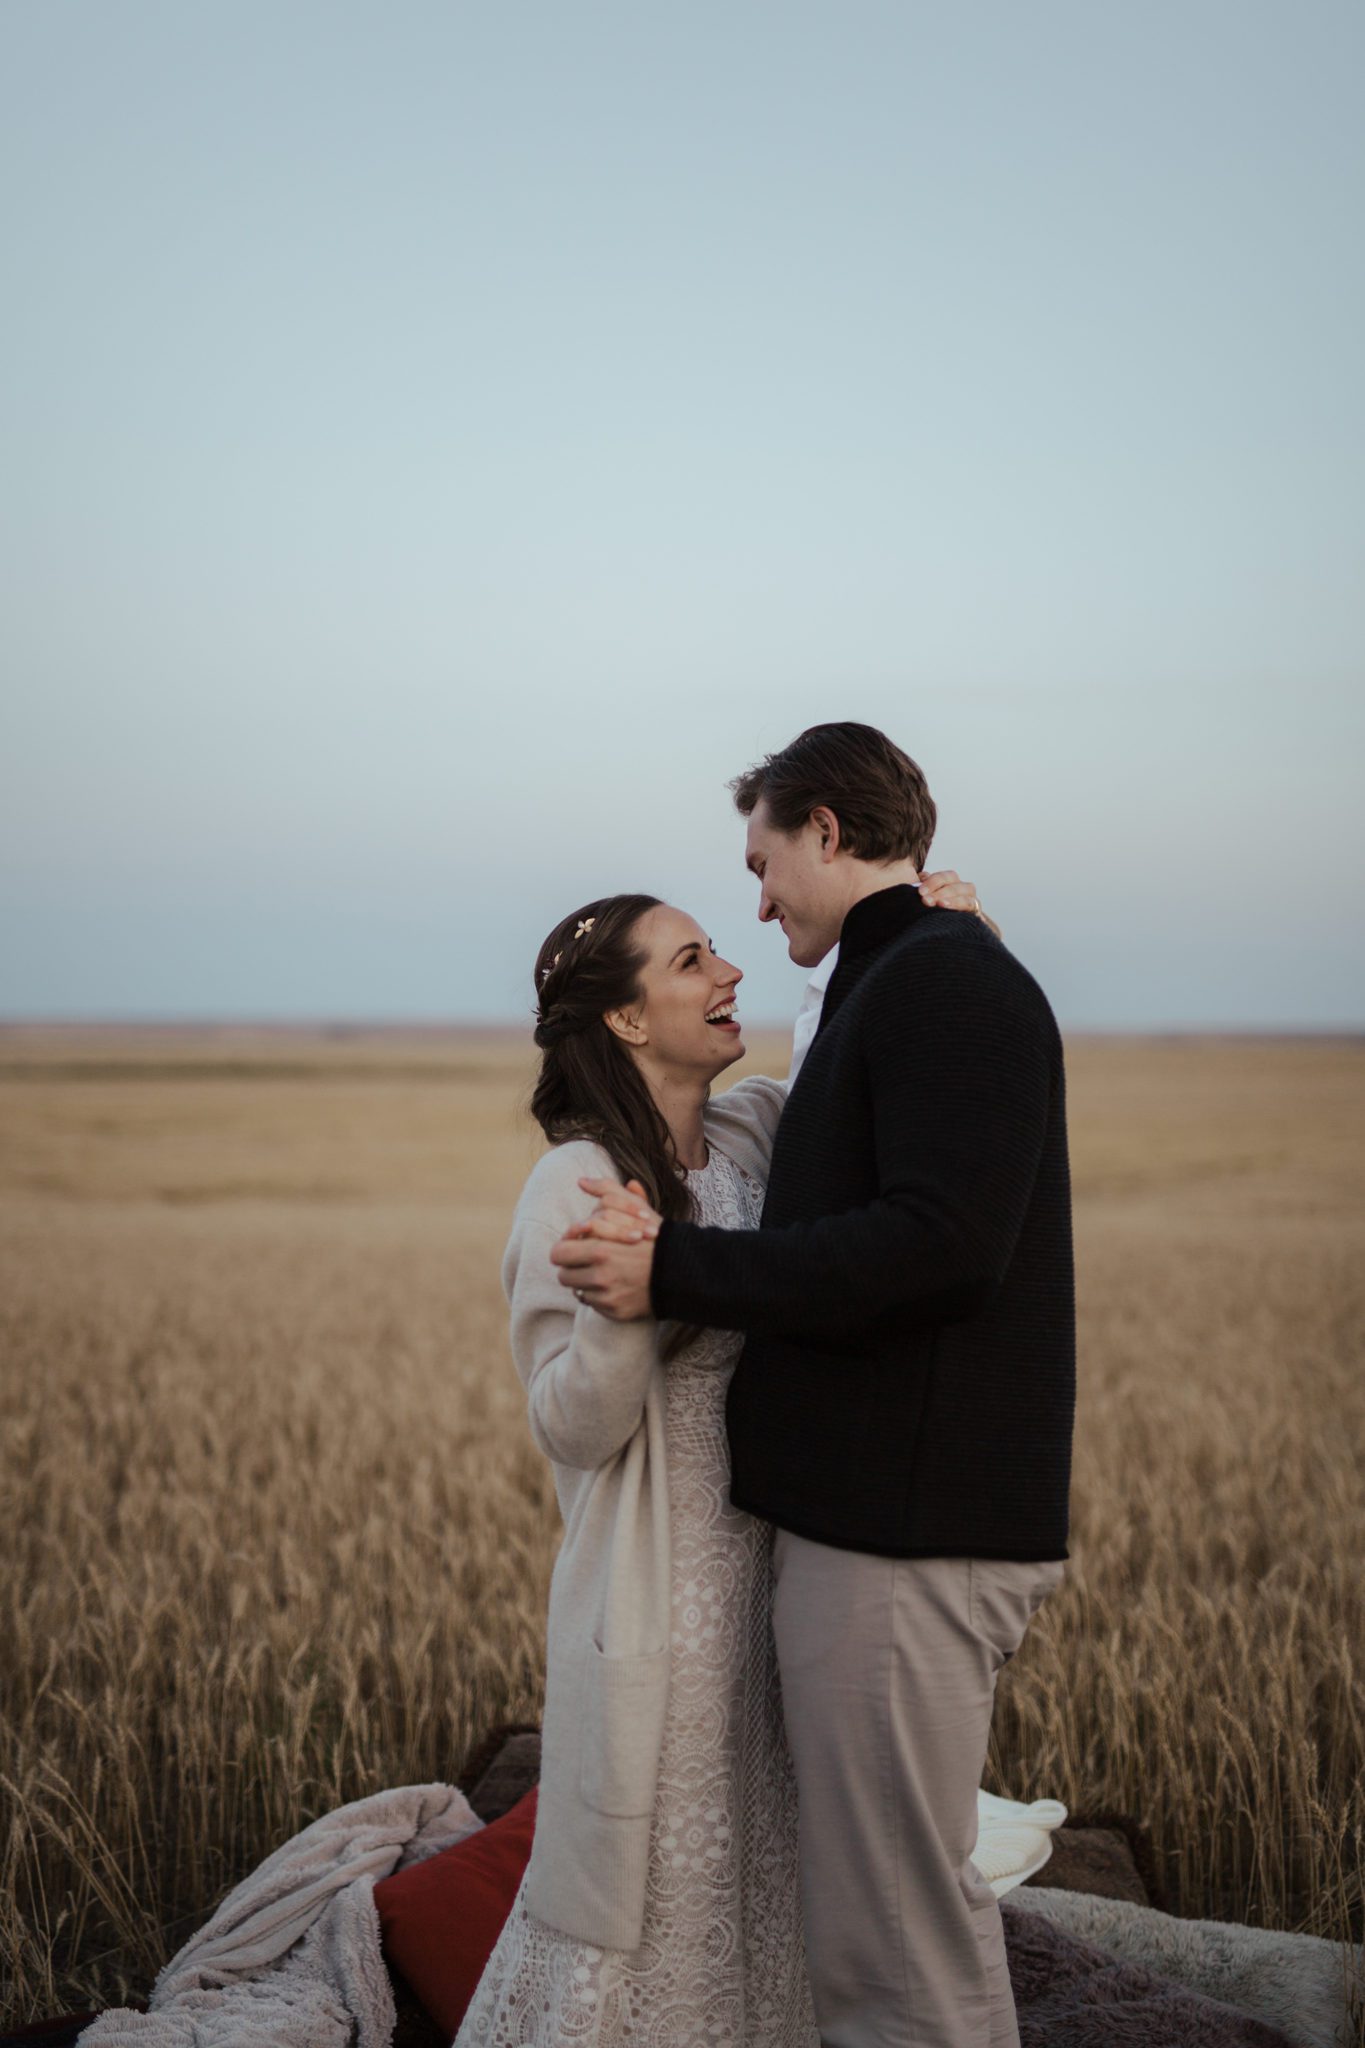 The newlyweds share a first dance in an open field, bride is wearing a lace-detailed gown, fall vow renewal inspiration. 